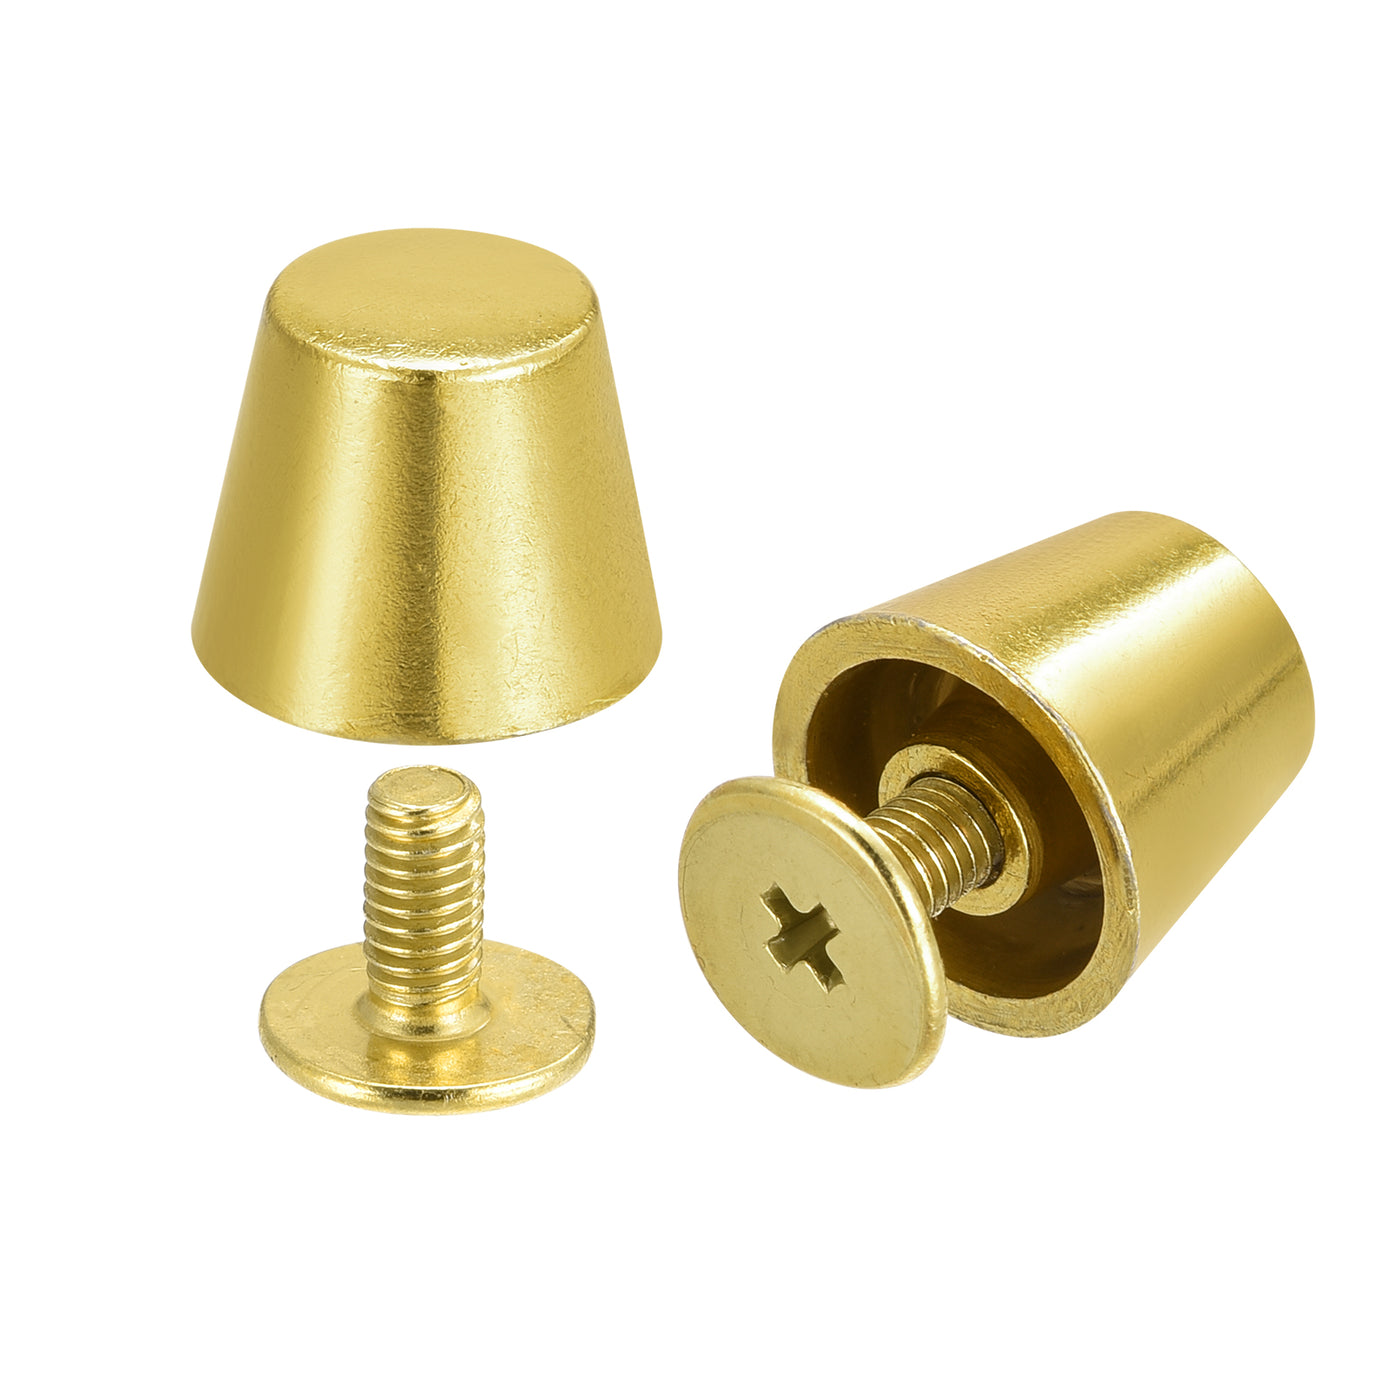 Uxcell Uxcell 10.5x9.5mm Screw Back Rivets Hollow Flat Head Leather Studs Brass Tone 10 Sets